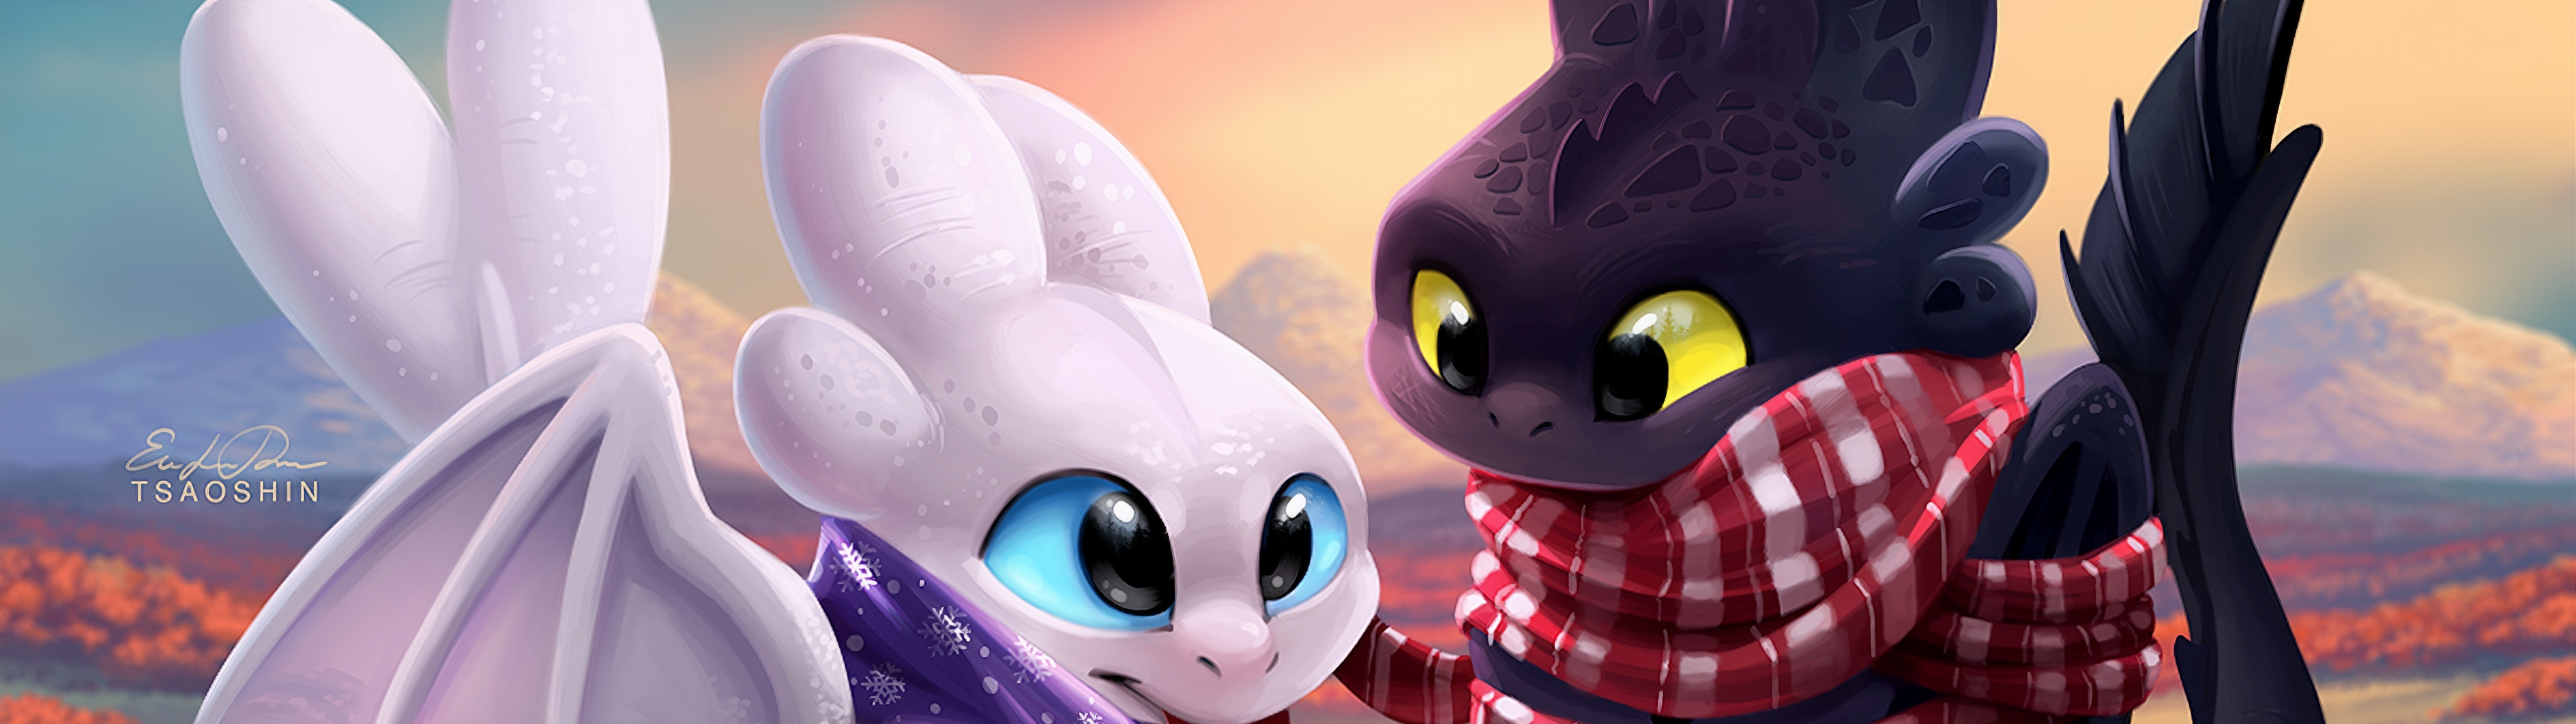 Wallpaper mood meeting art friendship pokemon toothless childrens  the night fury images for desktop section прочее  download